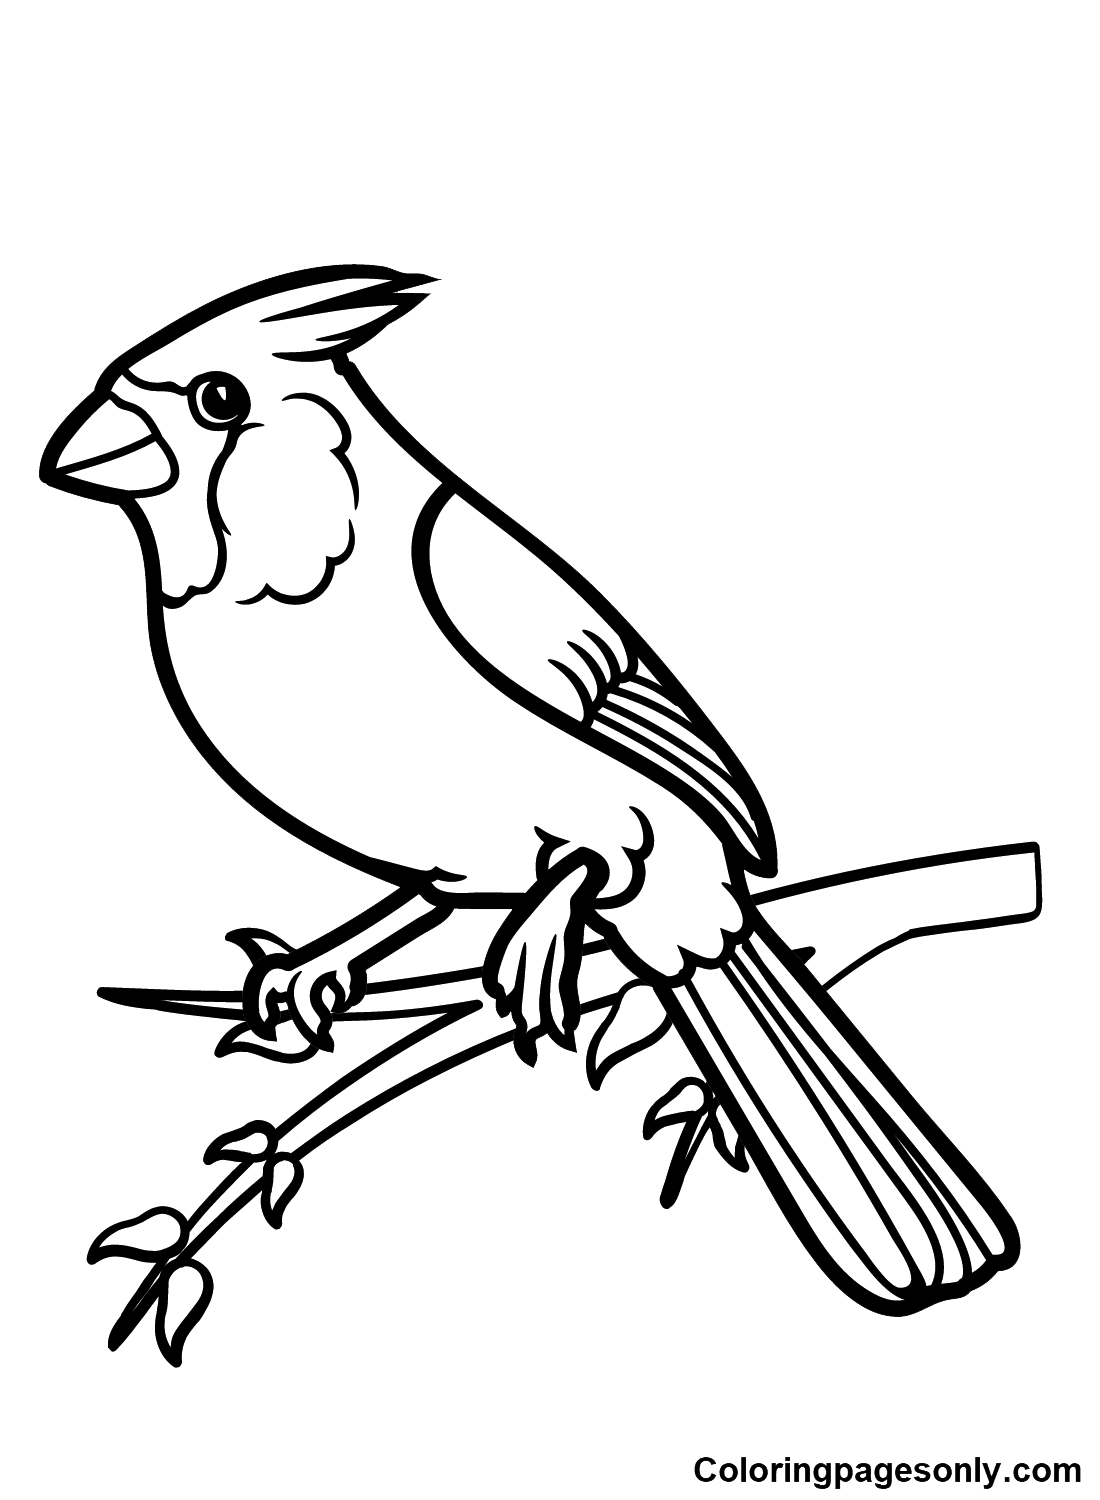 Cardinal Coloring Pages - Coloring Pages For Kids And Adults